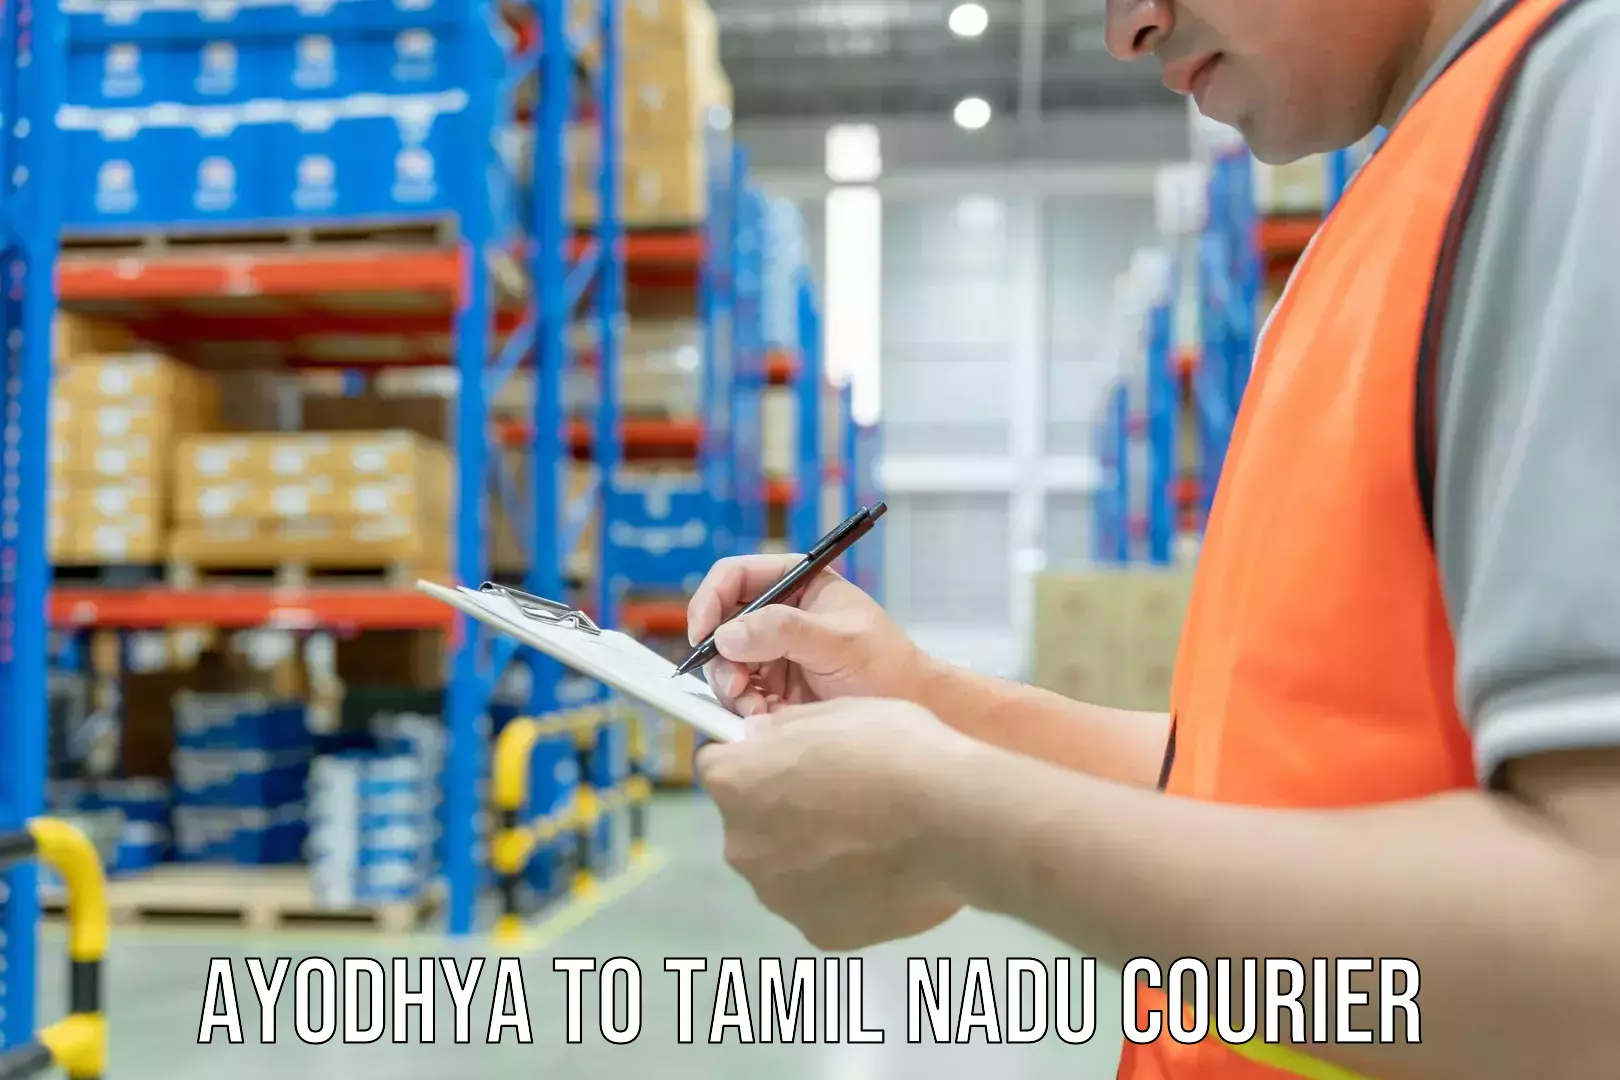 Nationwide courier service Ayodhya to Tamil Nadu